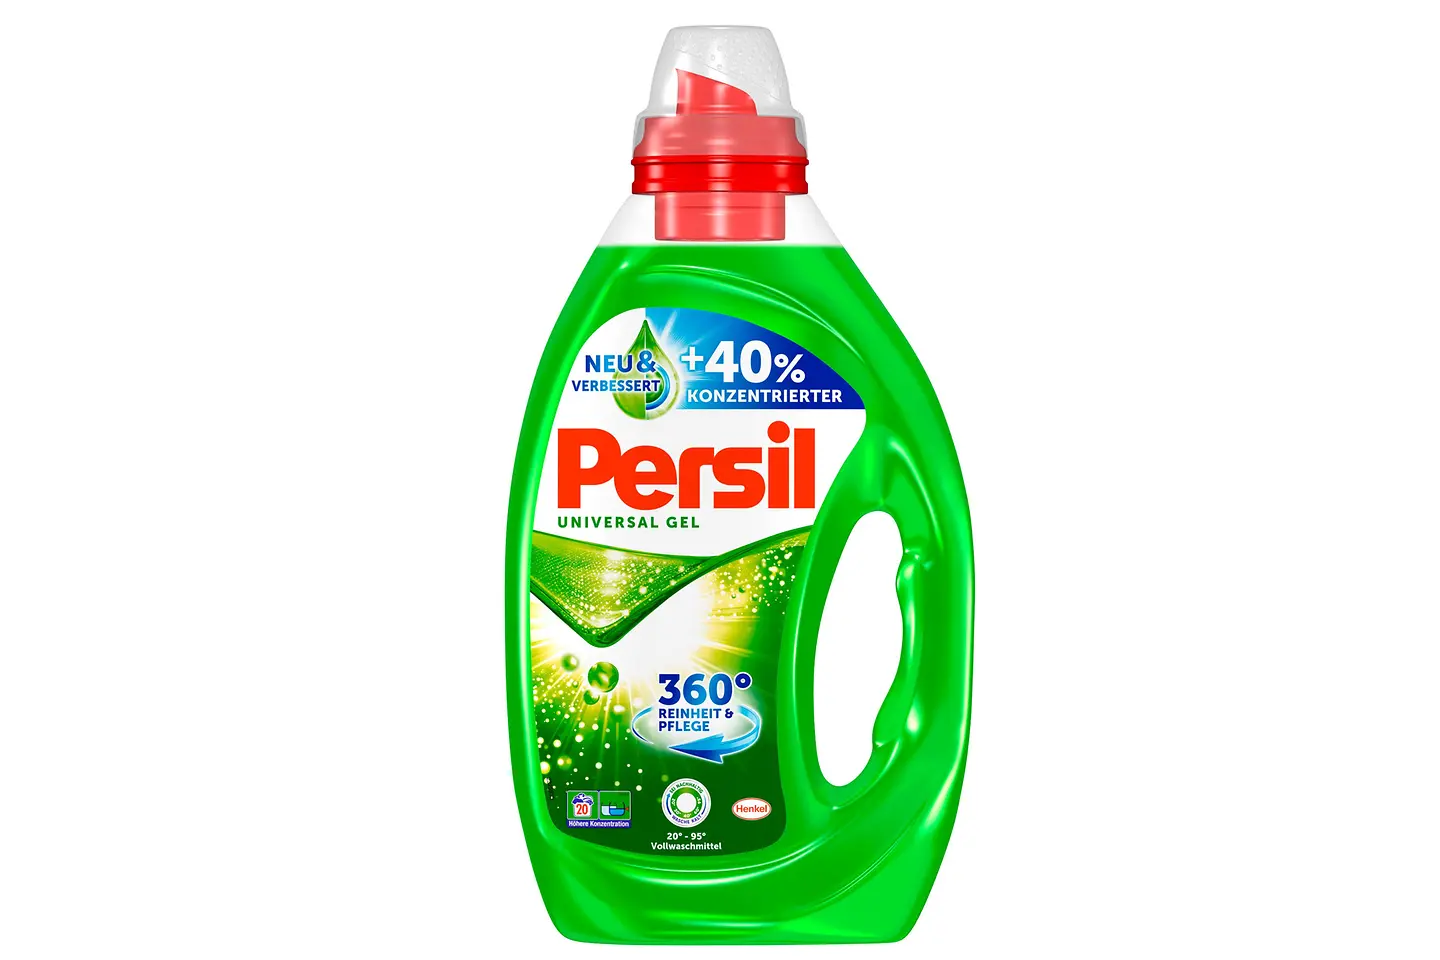 Persil - The bottles are 100 percent recyclable